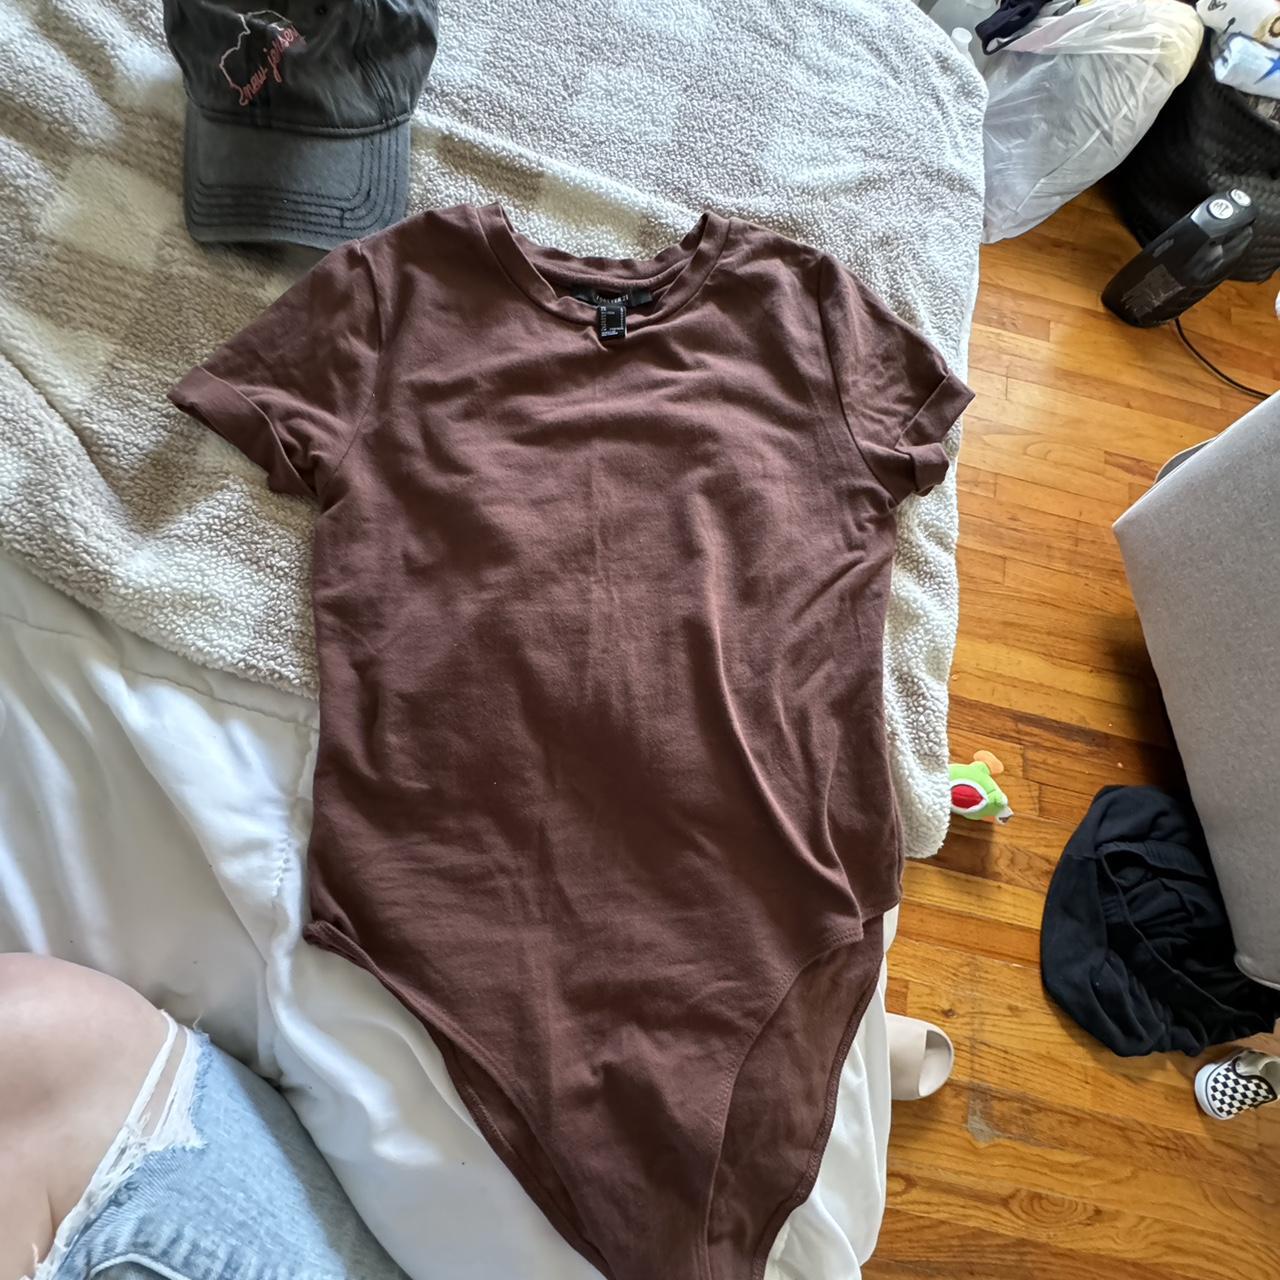 item listed by xcarleylevayx